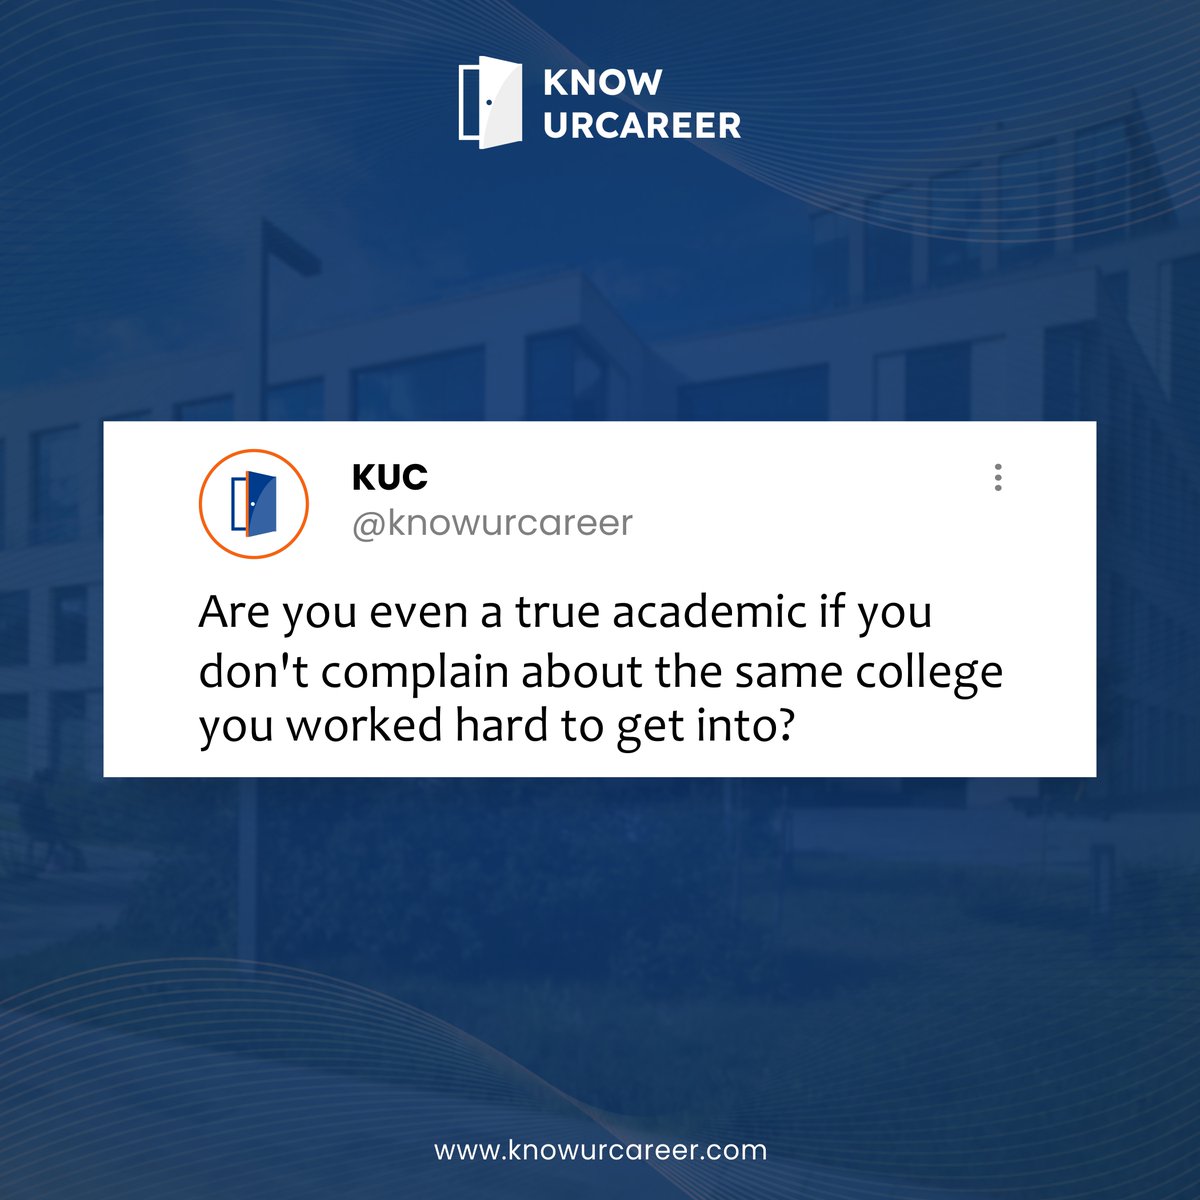 📚 🏫 I love studying here but ............

👉🏻 Complete the sentence in the comments!

#AcademicLife #CollegeStruggles #AcademicComplaints #CollegeAdmissions #UniversityLife #KnowUrCareer